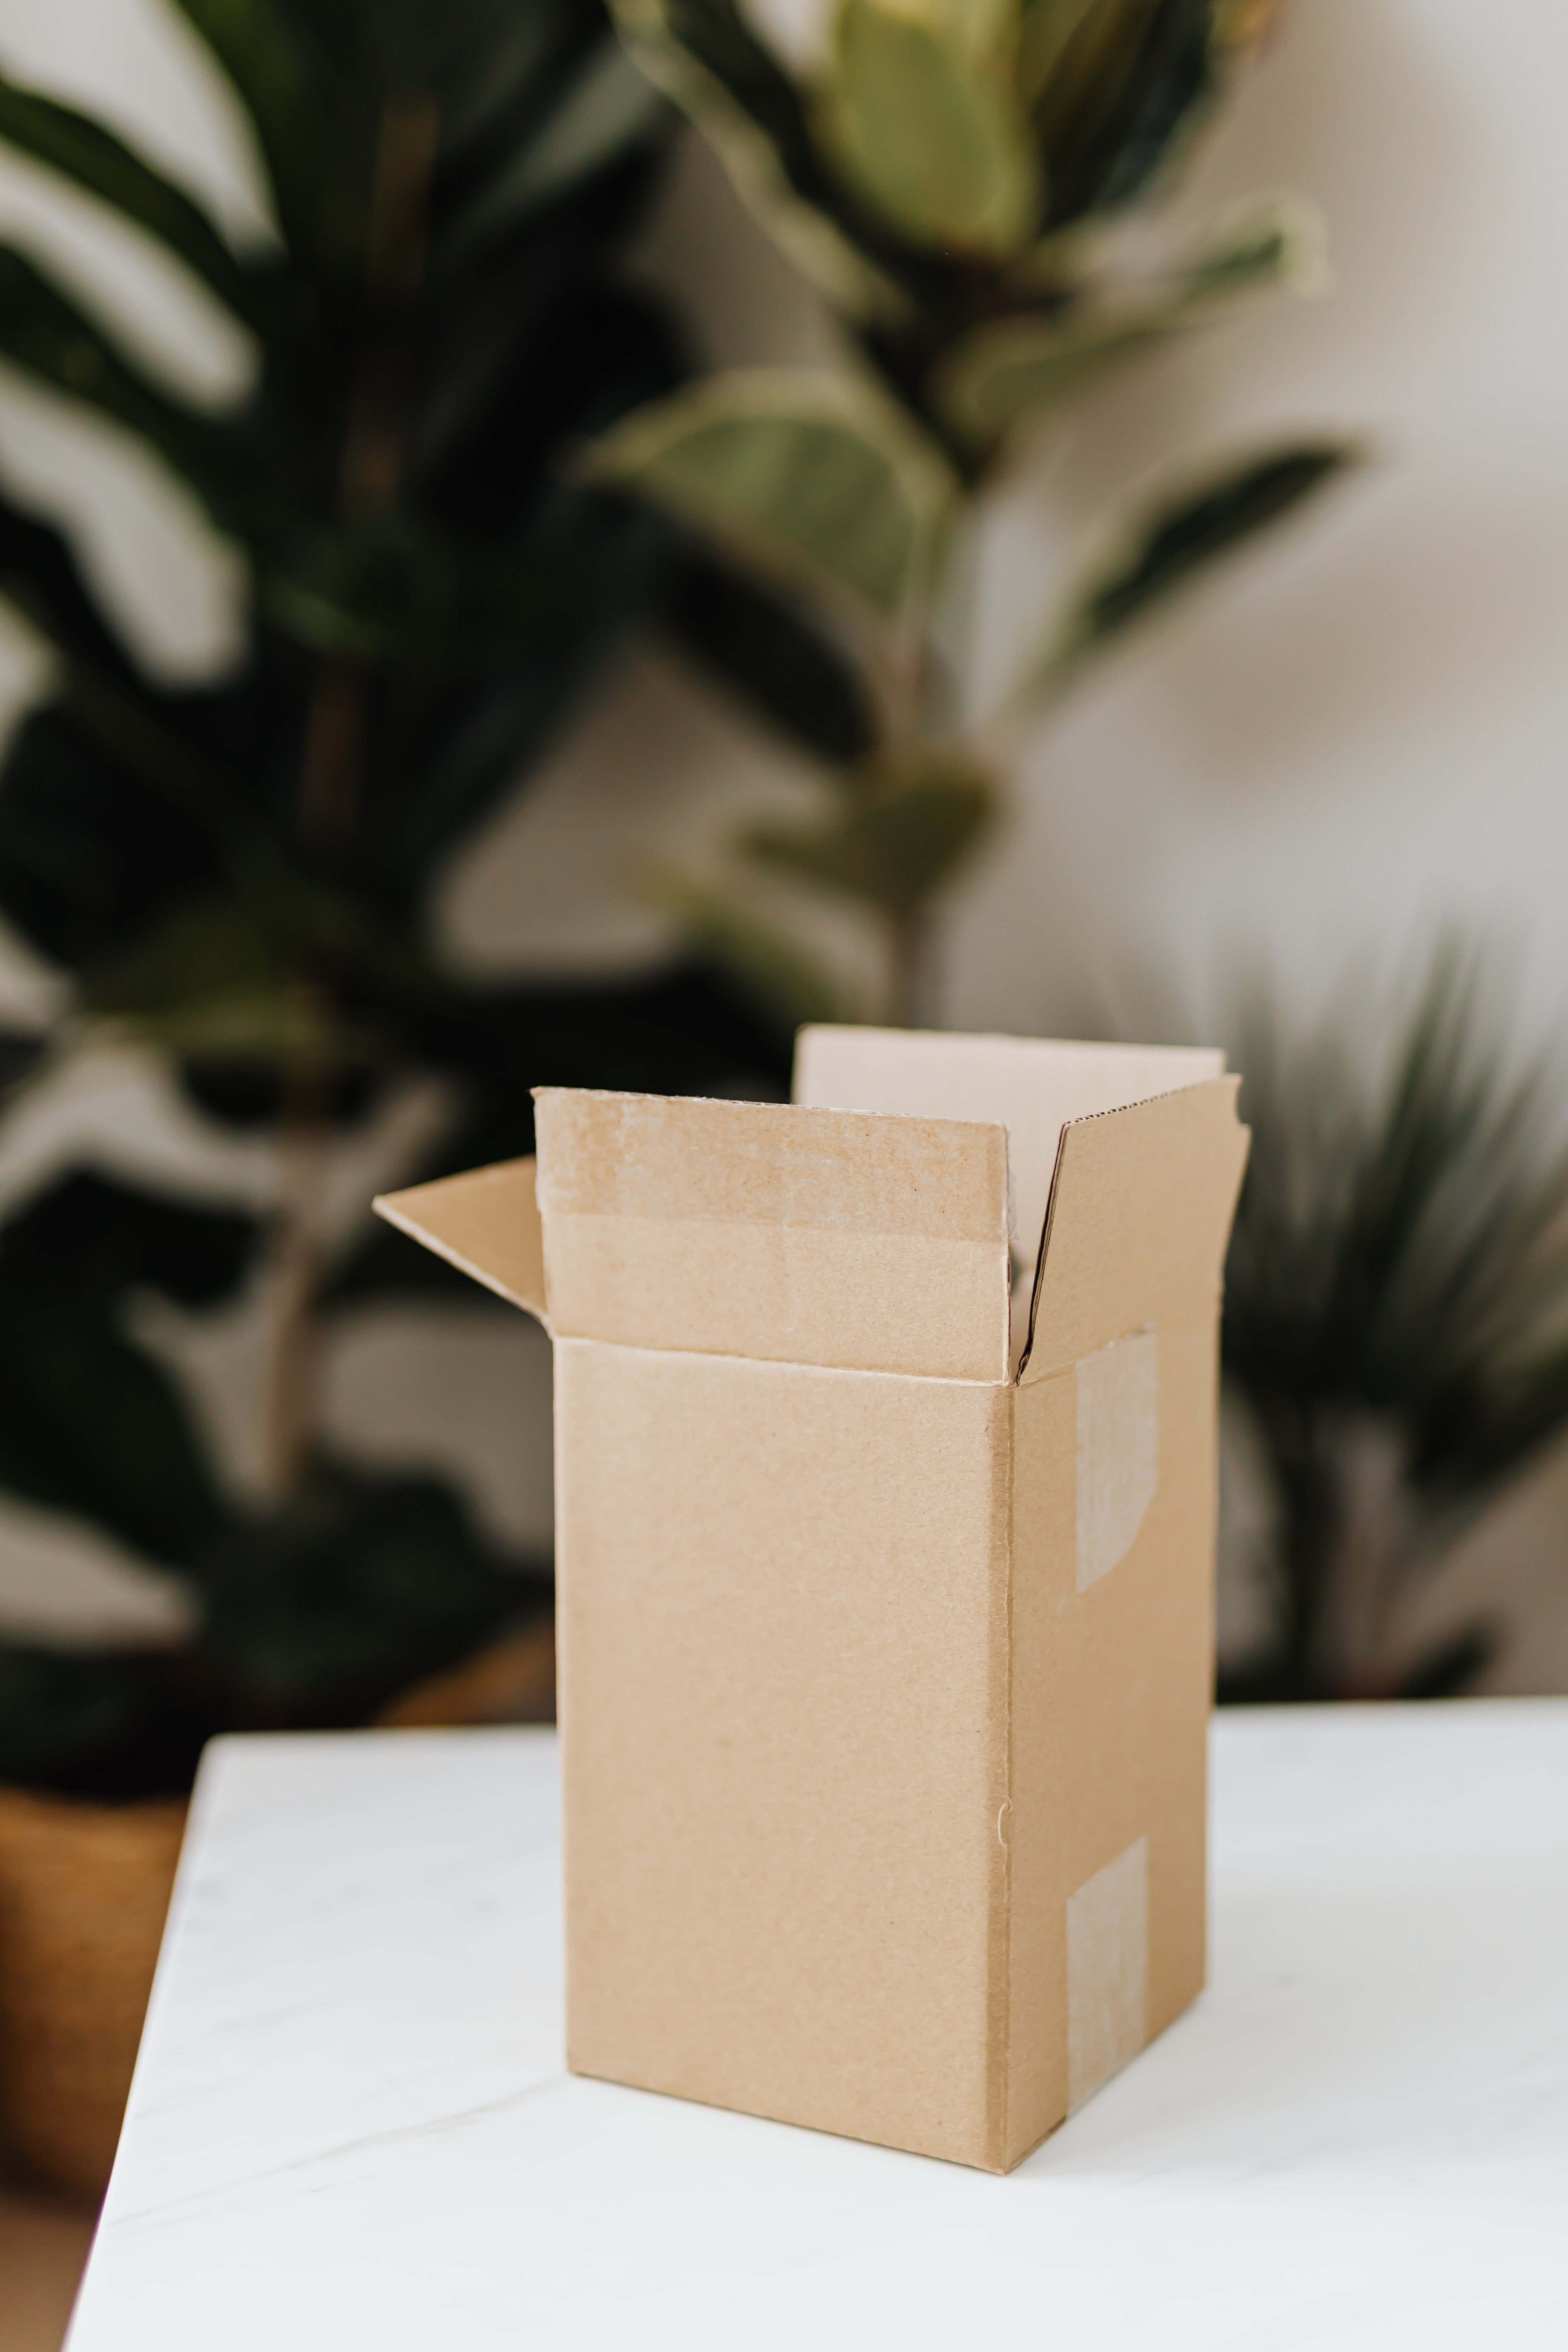 Cardboard box on table in room with plants. | Source: Pexels